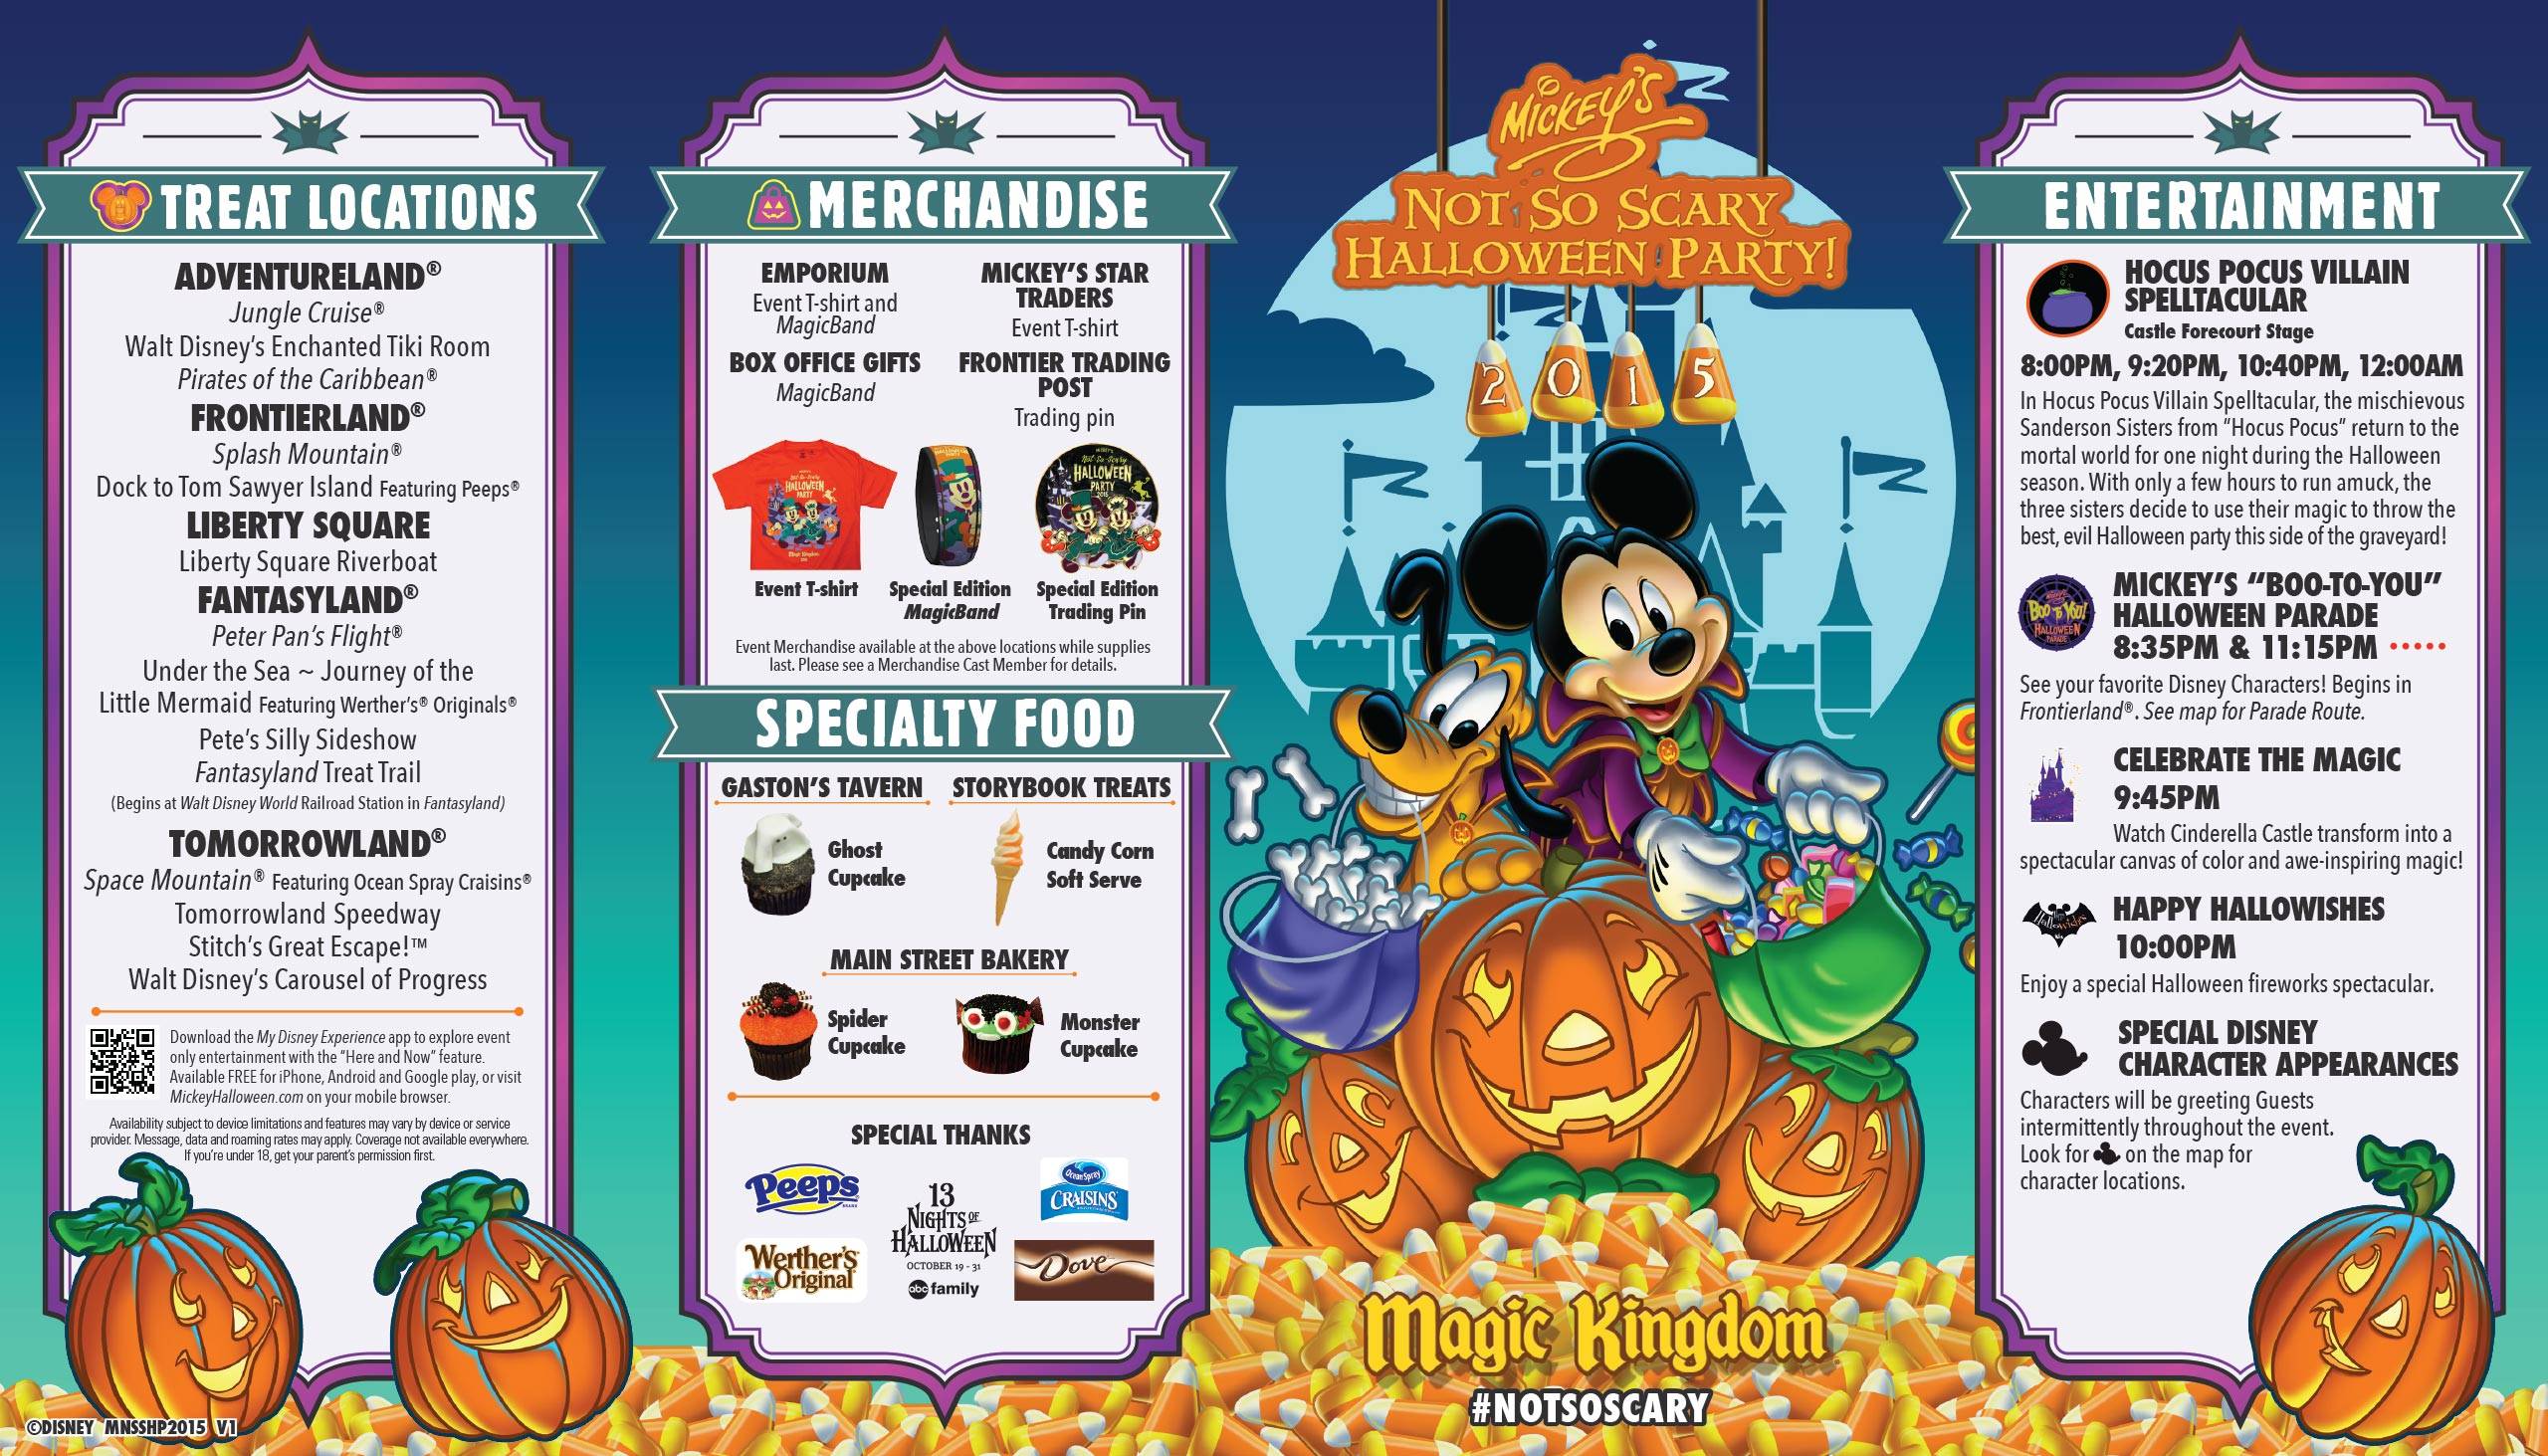 Details on the 2015 Mickey's Not-So-Scary Halloween Party entertainment schedule, trick or treat stops, dining and attractions